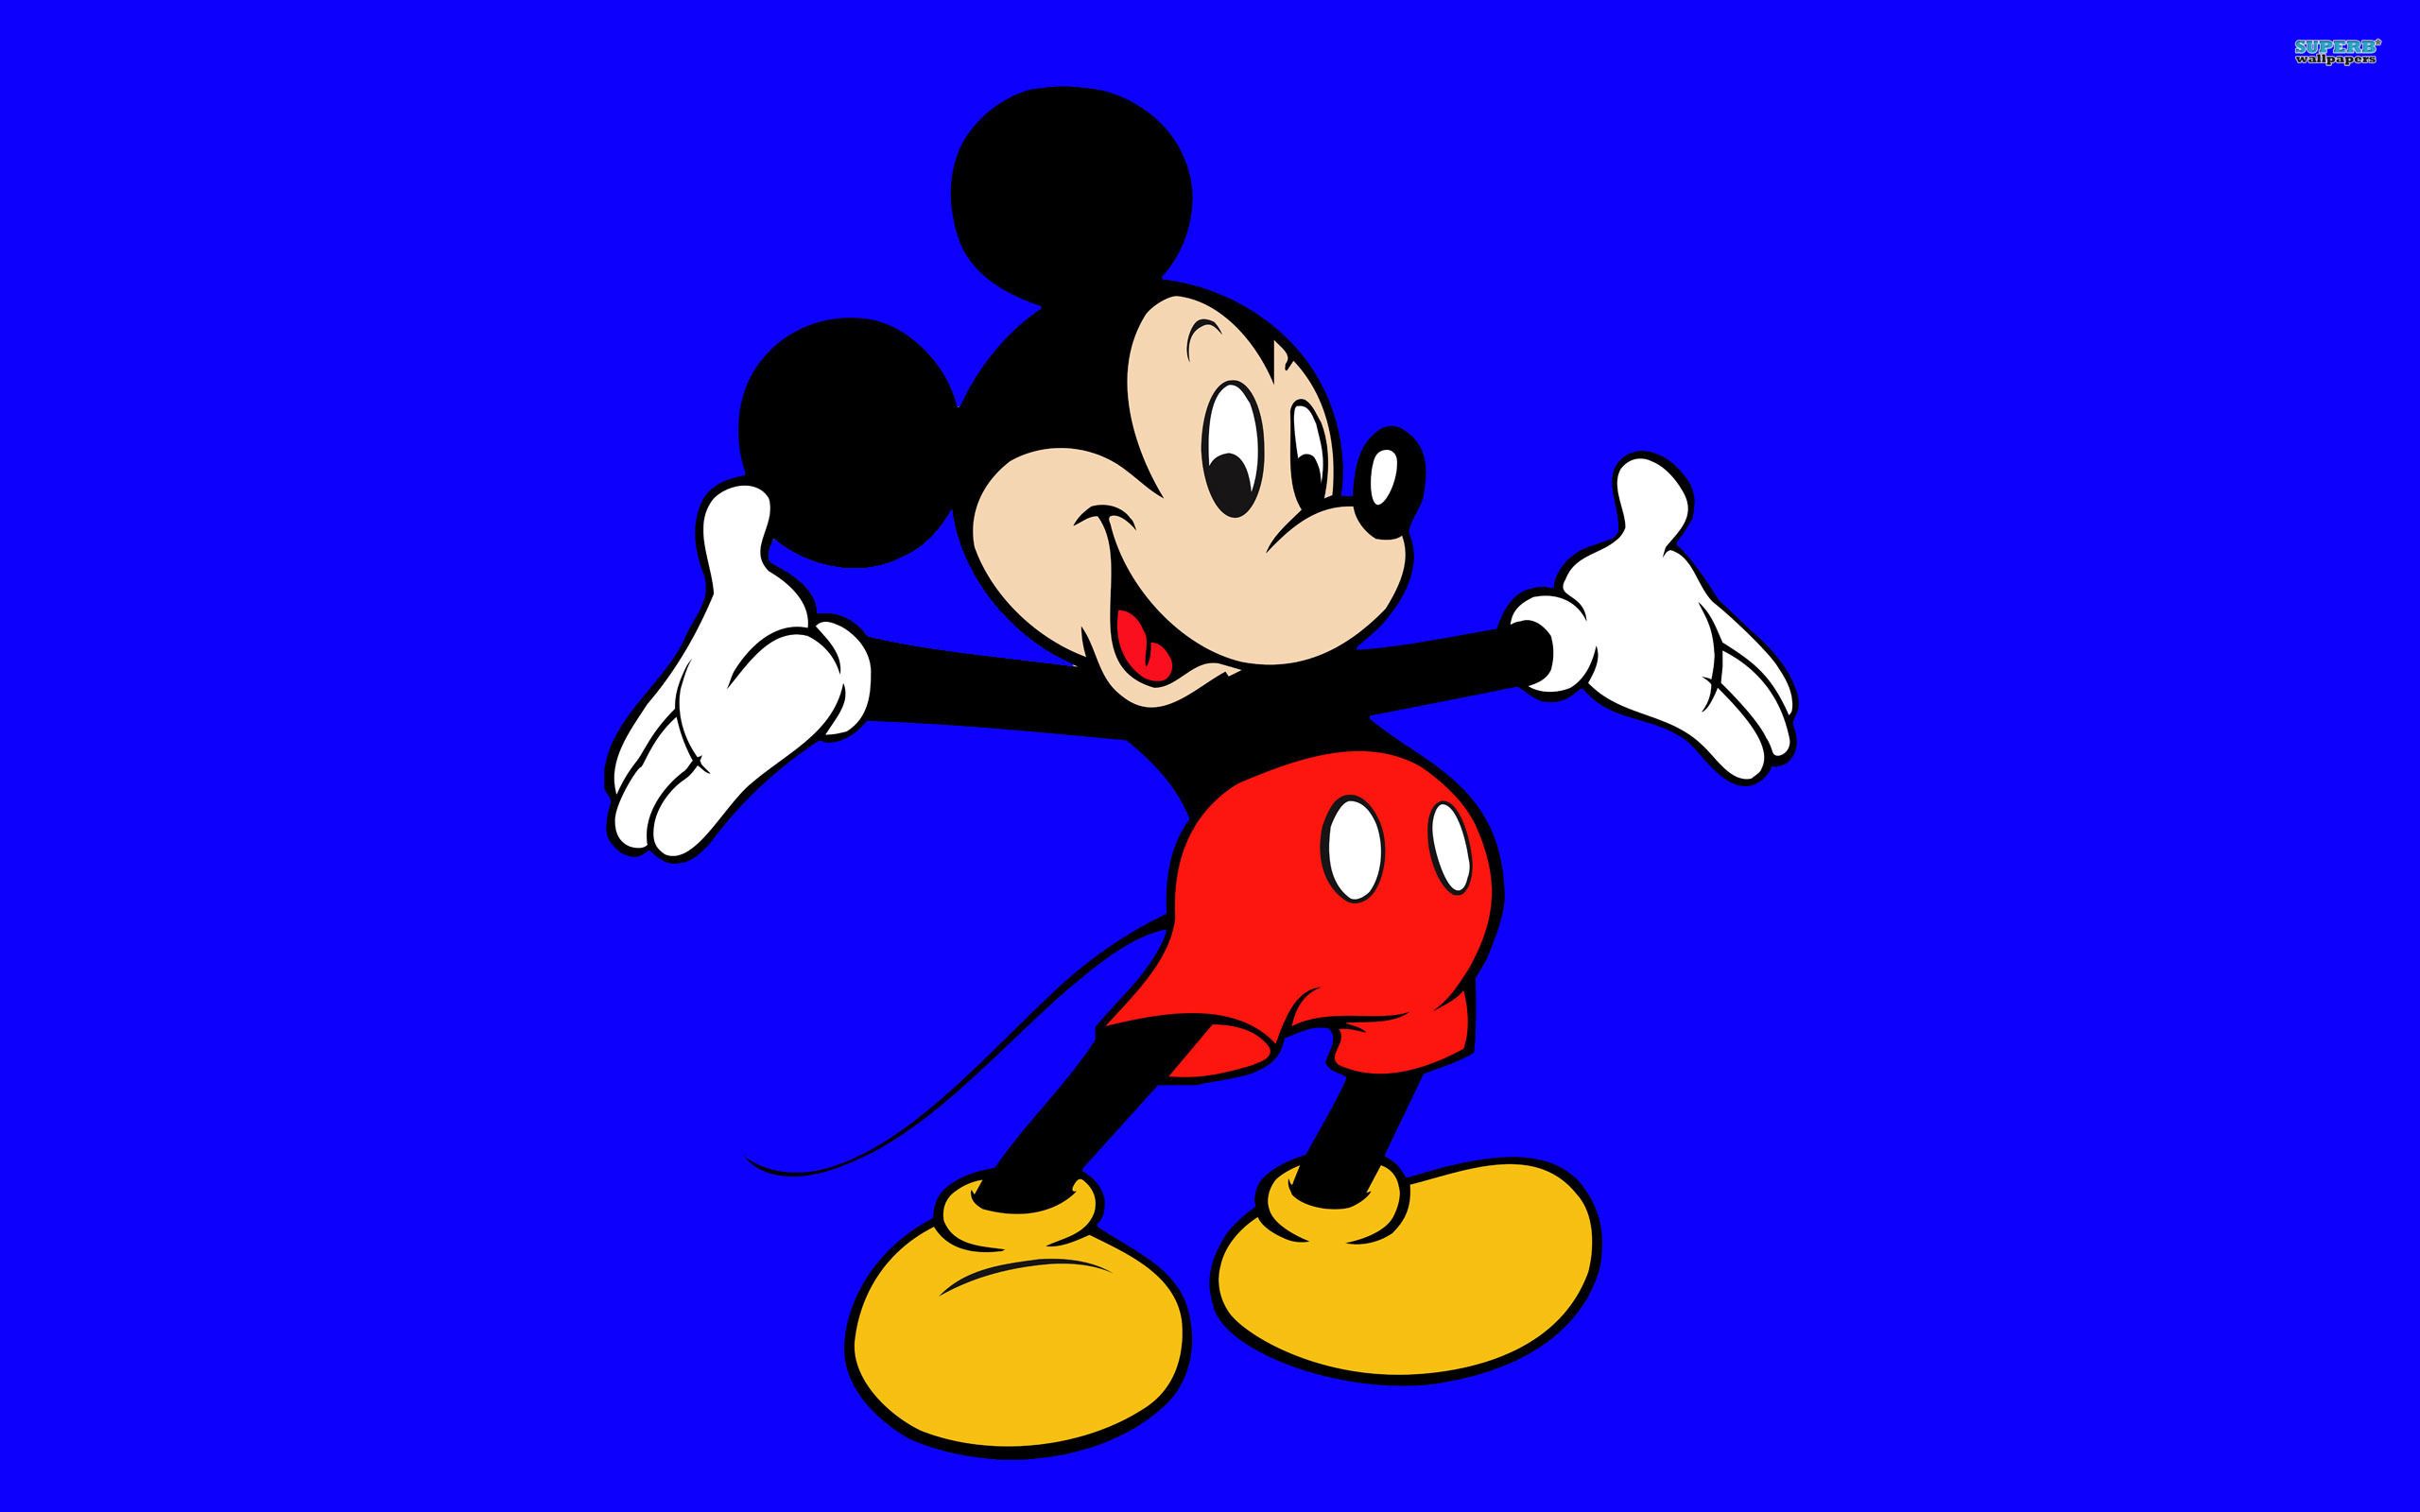 mickey mouse. Mickey Mouse wallpaper 2560x1600. Mickey mouse wallpaper, Mickey mouse picture, Mickey mouse cartoon